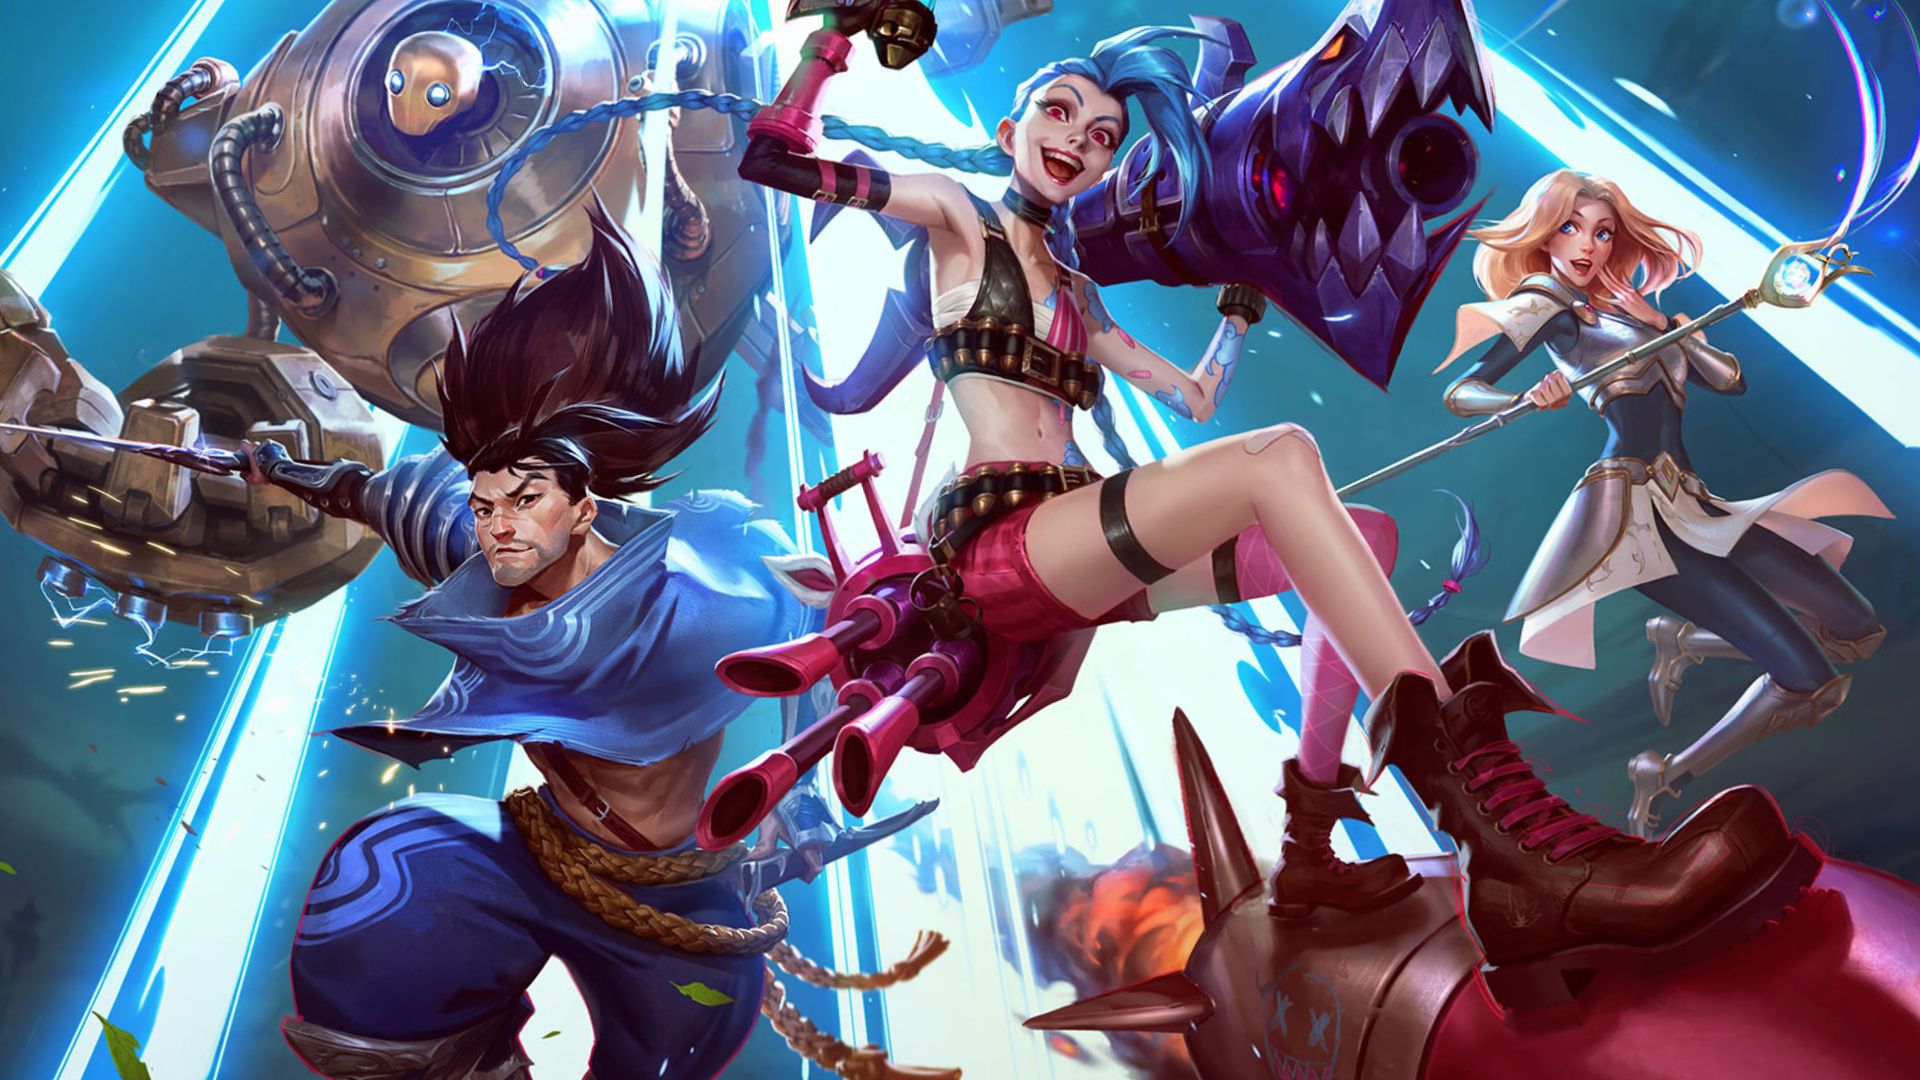 League of Legends: Wild Rift sets a new standard for mobile MOBAs